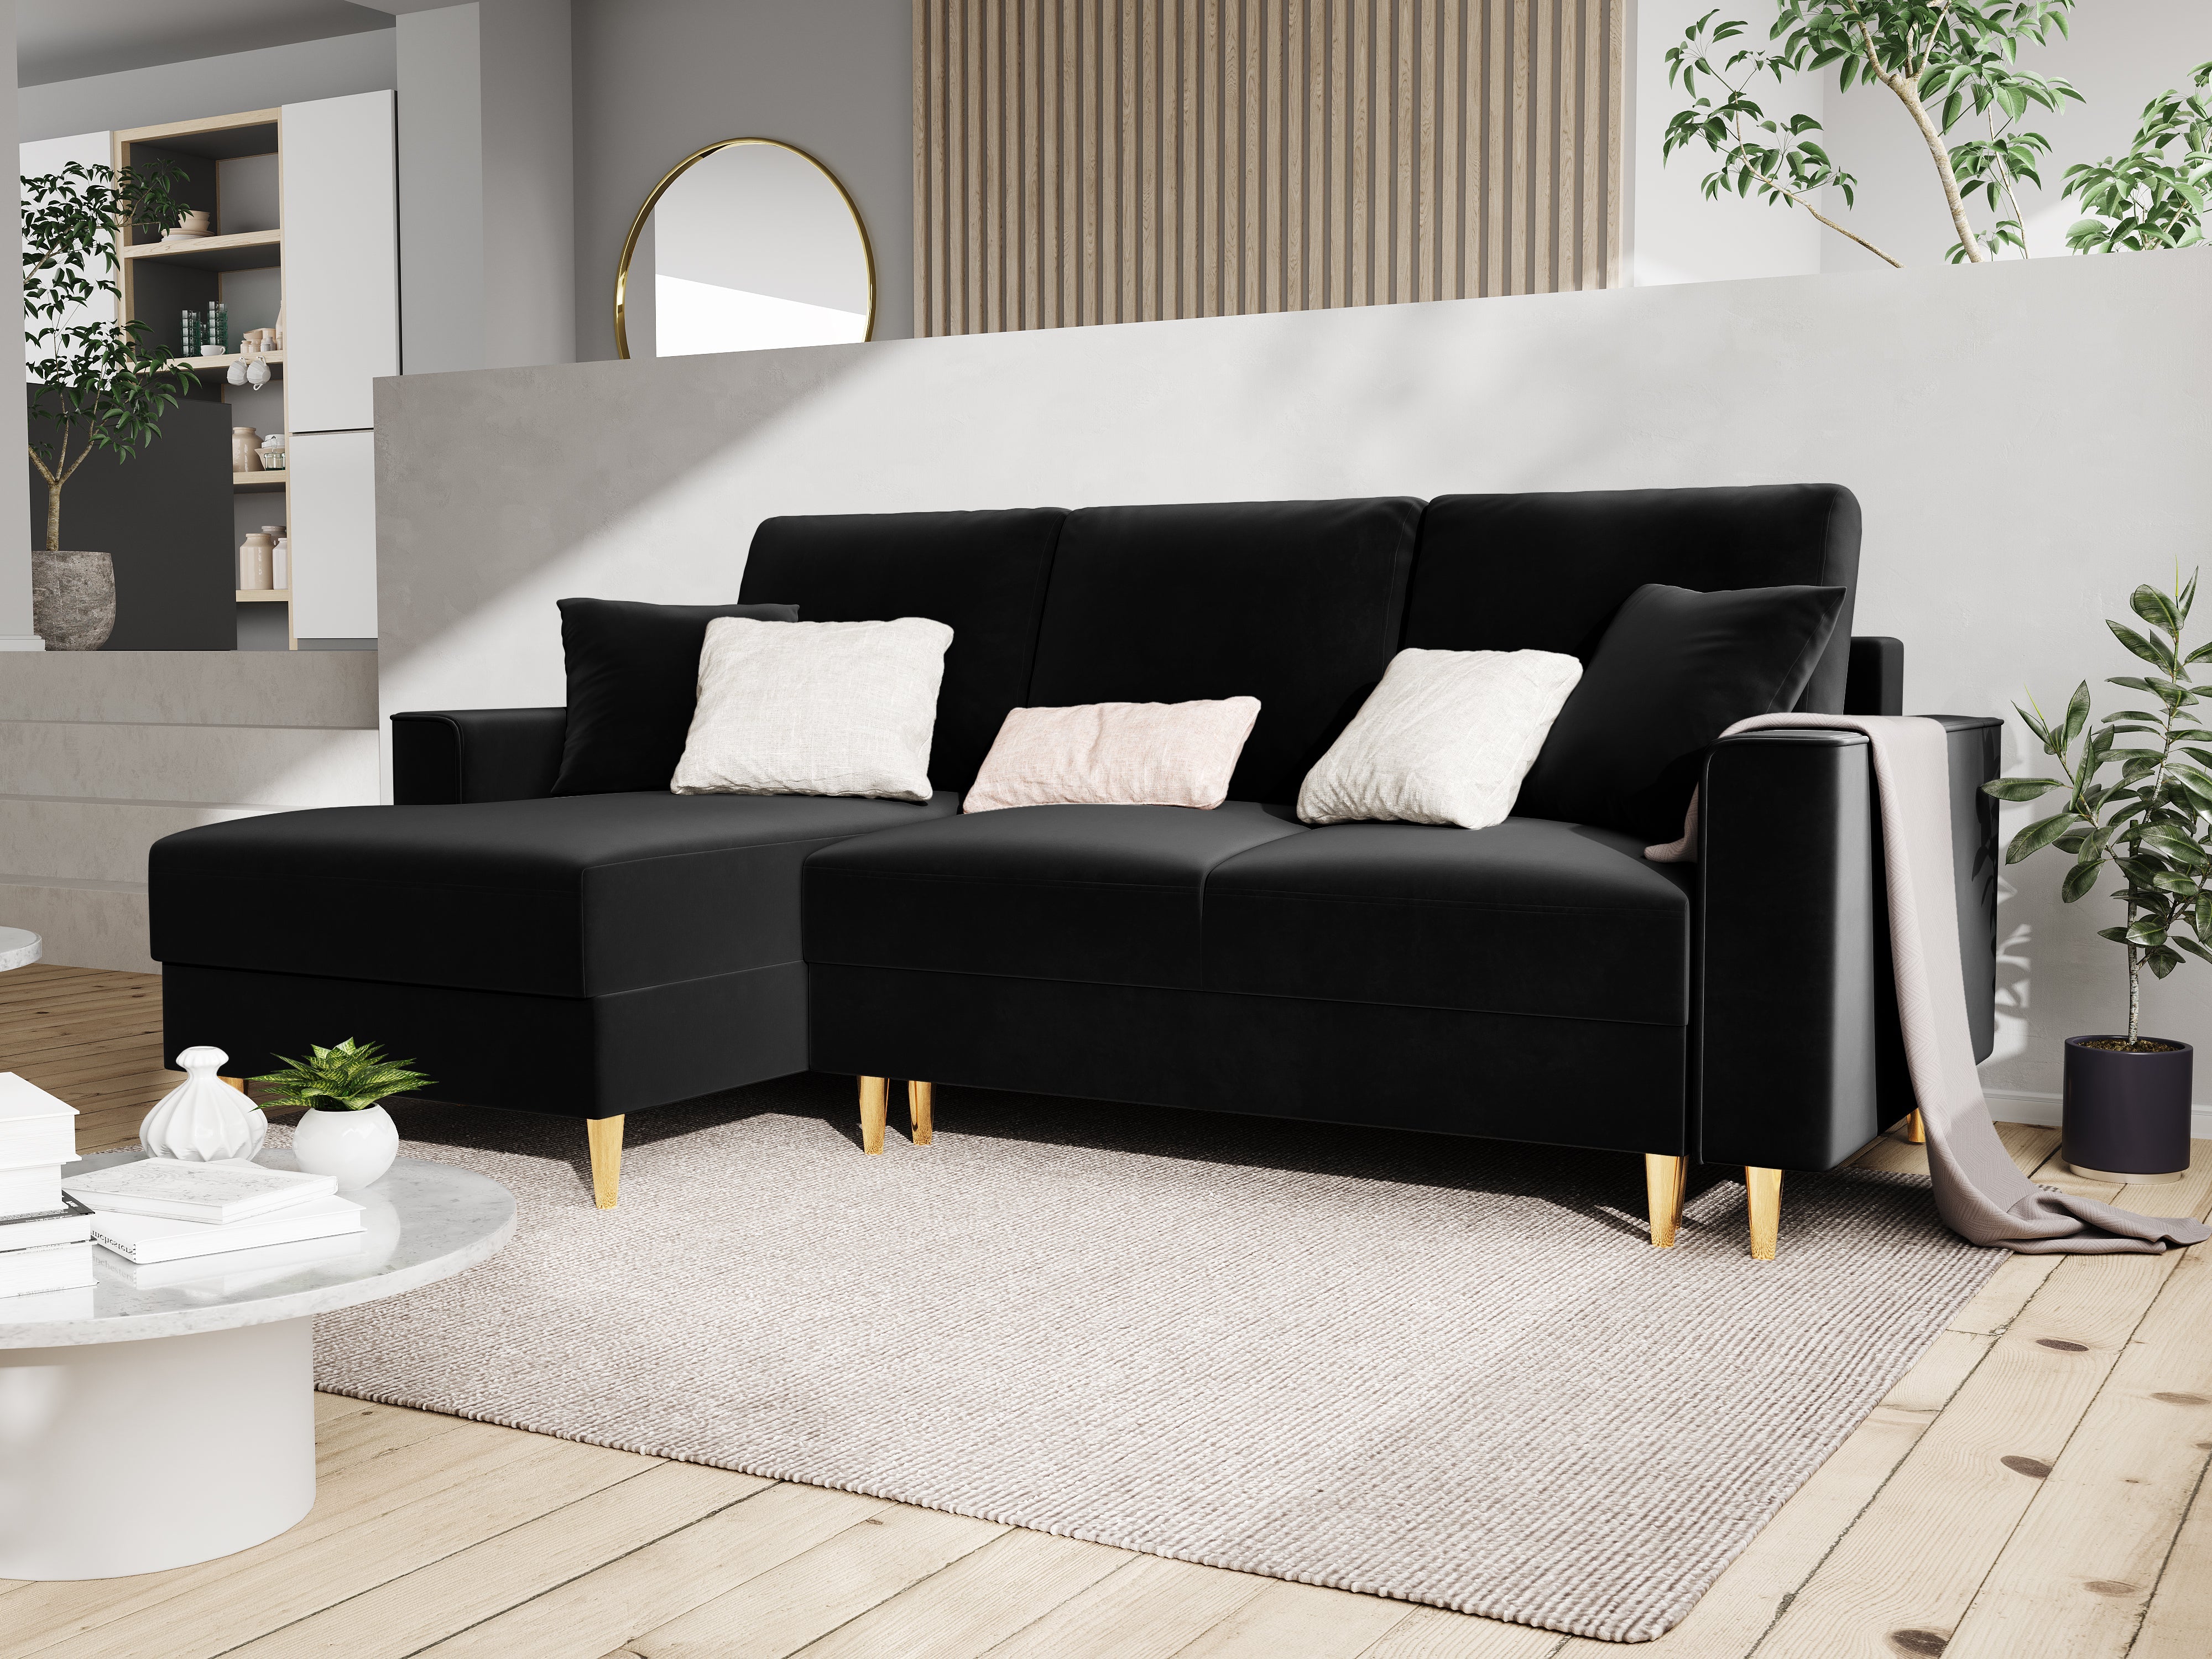 Velvet Left Corner Sofa With Bed Function And Box, "Cartadera", 4 Seats, 225x147x90
Made in Europe, Mazzini Sofas, Eye on Design